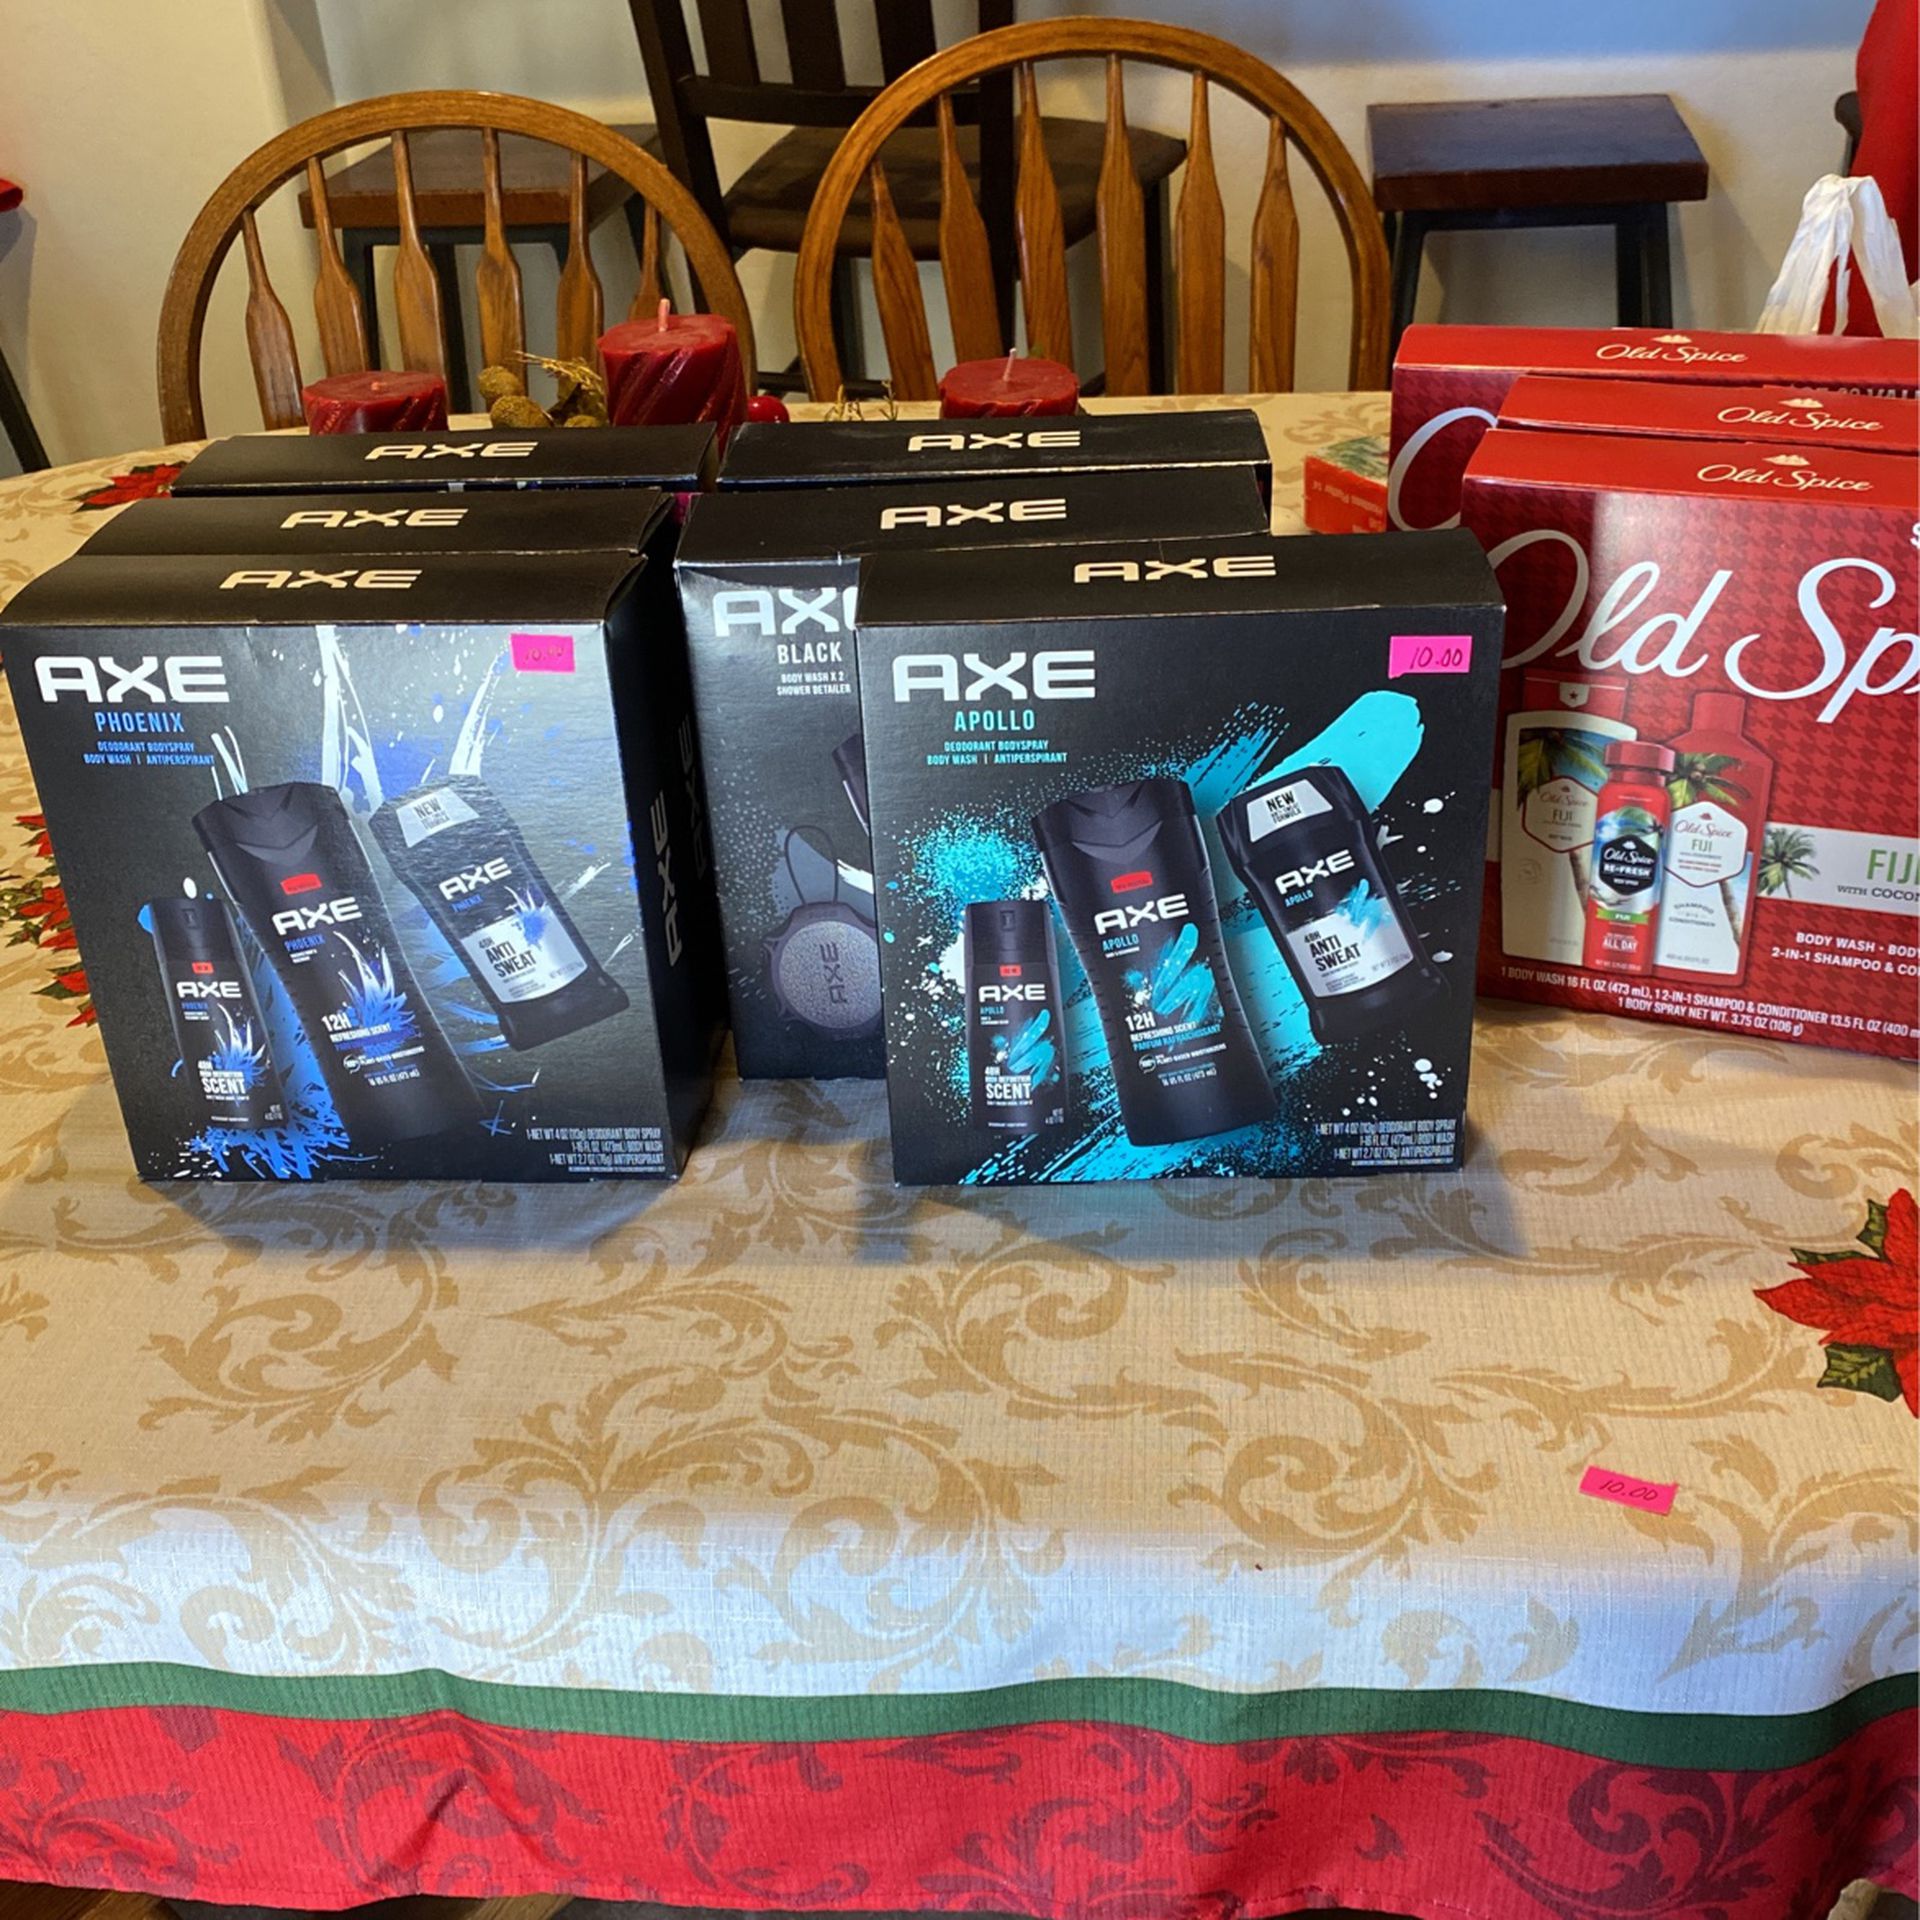 AXE AND OLD SPICE GIFT SETS